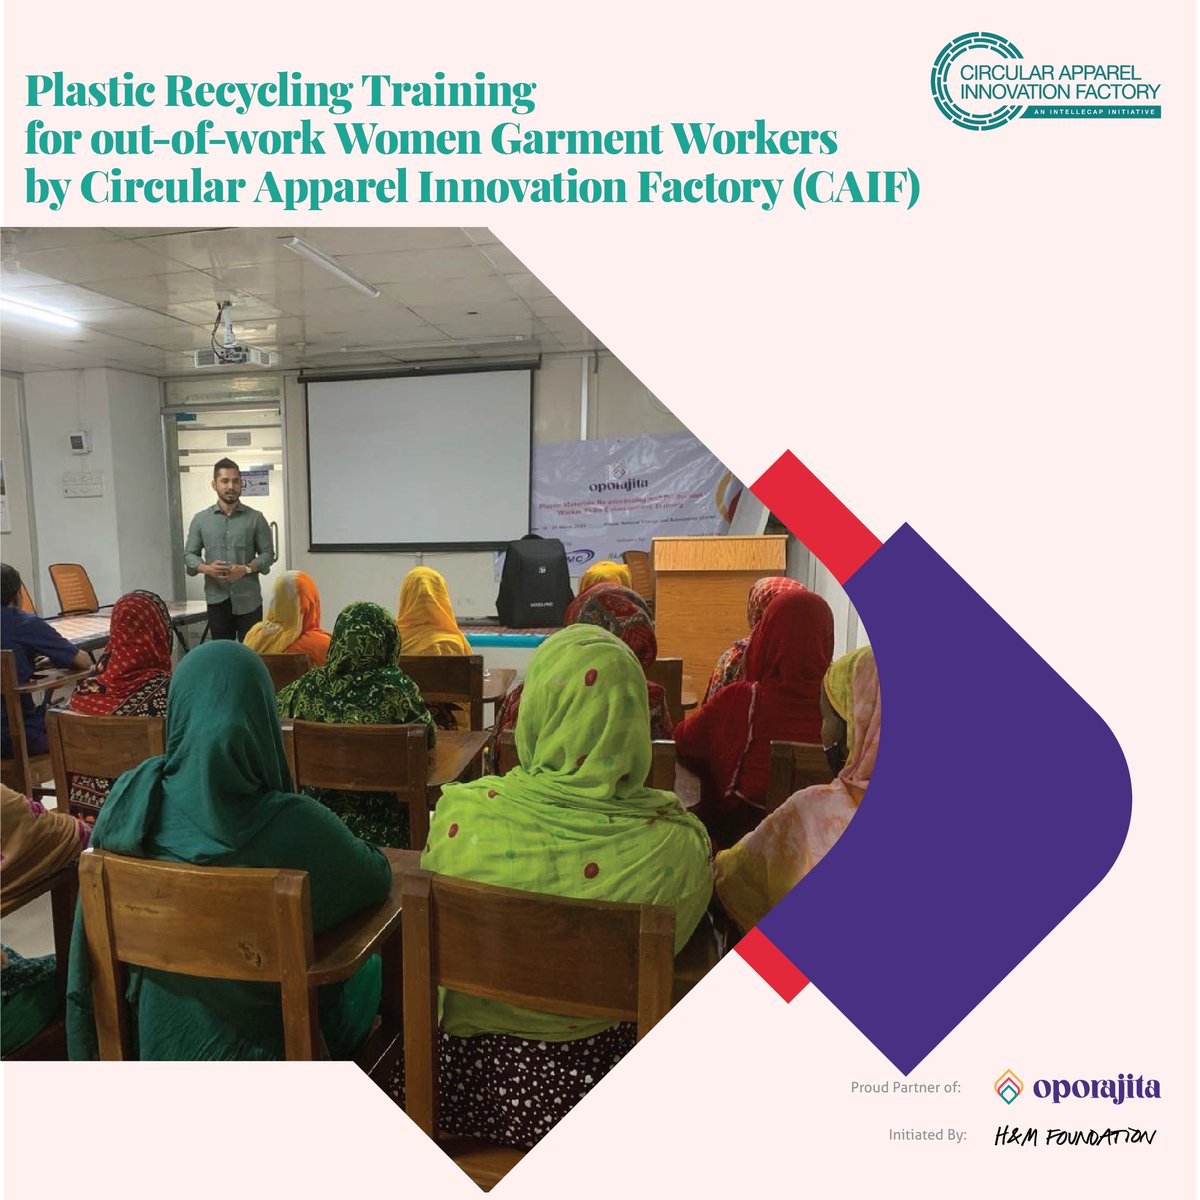 We at @ApparelCircular are a partner to ‘Oporajita: Collective Impact on Future of Work in Bangladesh’ by @hmfoundation Delighted to share about a Plastic Recycling Training for out-of-work Women Garment Workers at National Polymer, in collaboration with learning partner RMC